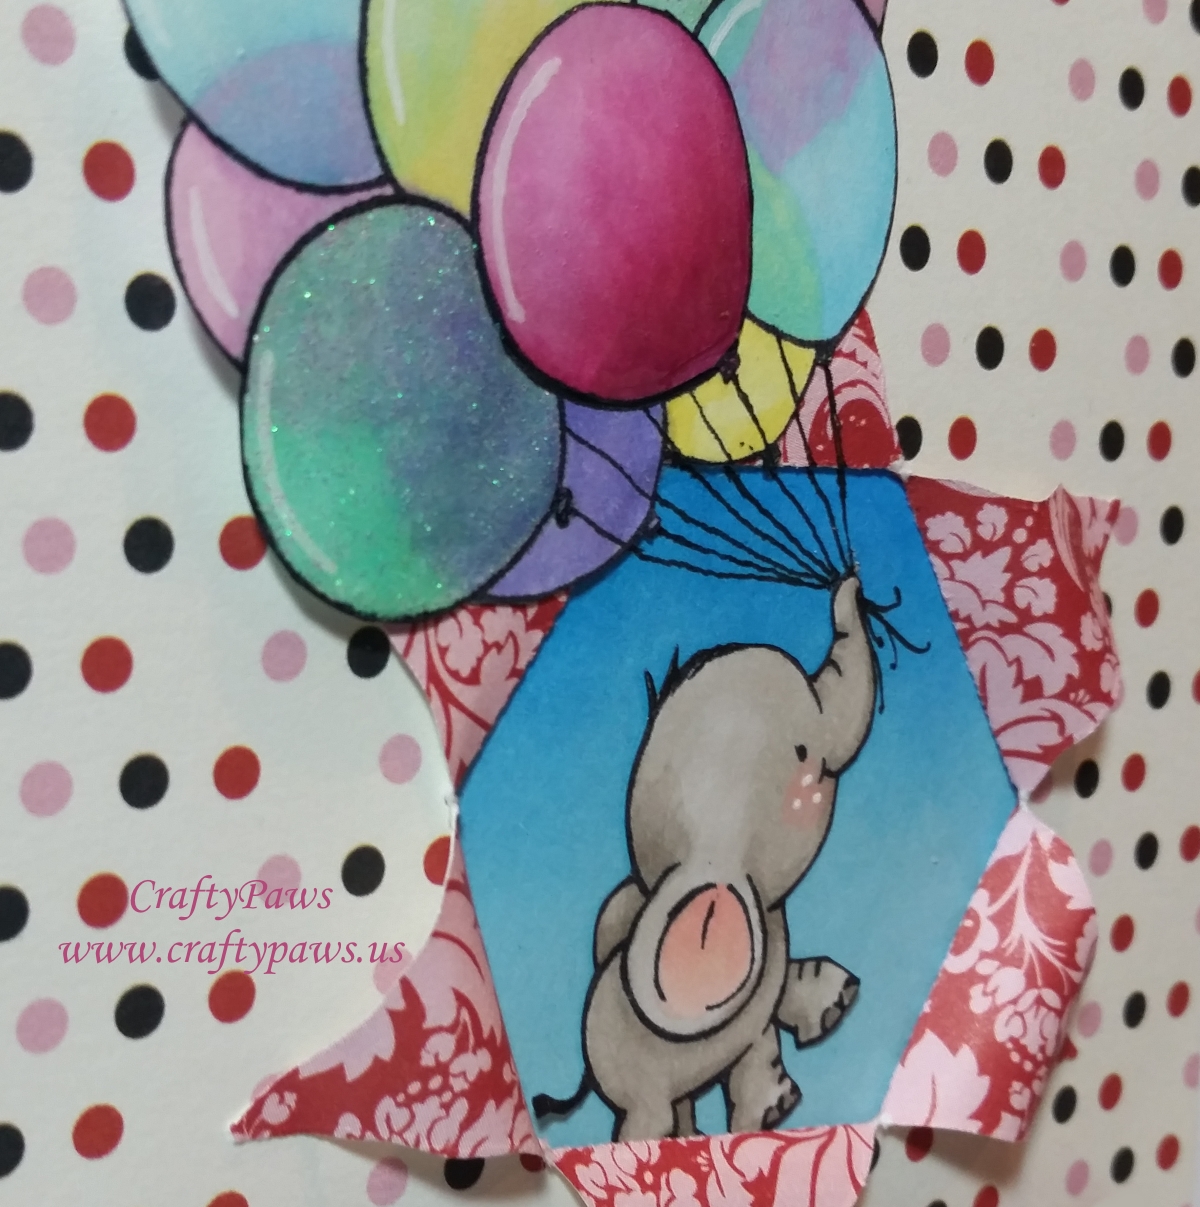 Uplifting Card for Emily’s Card Shower | CraftyPaws